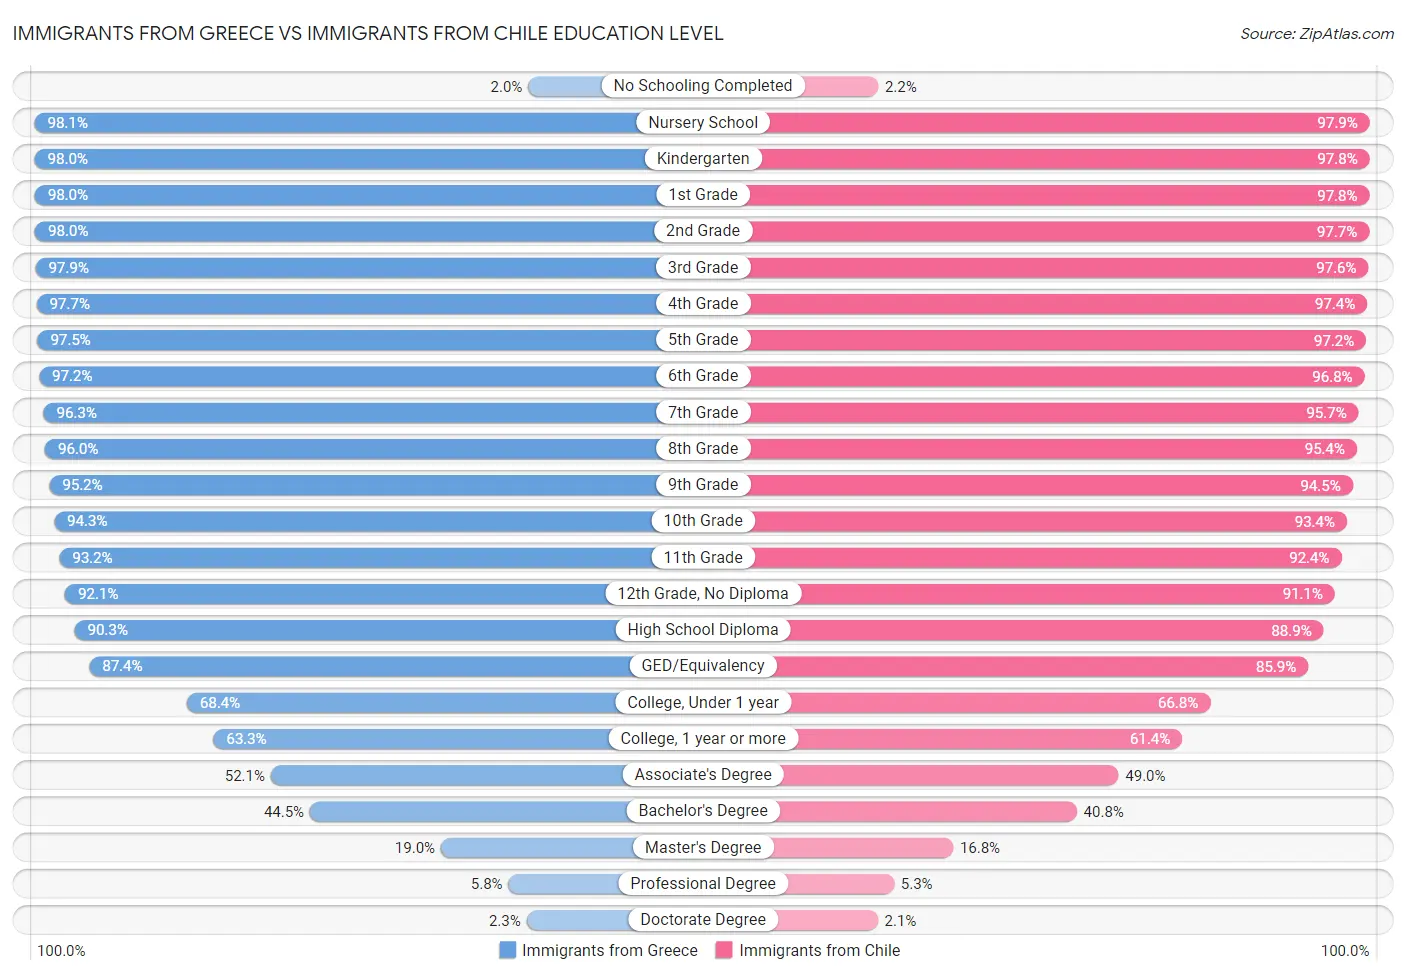 Immigrants from Greece vs Immigrants from Chile Education Level